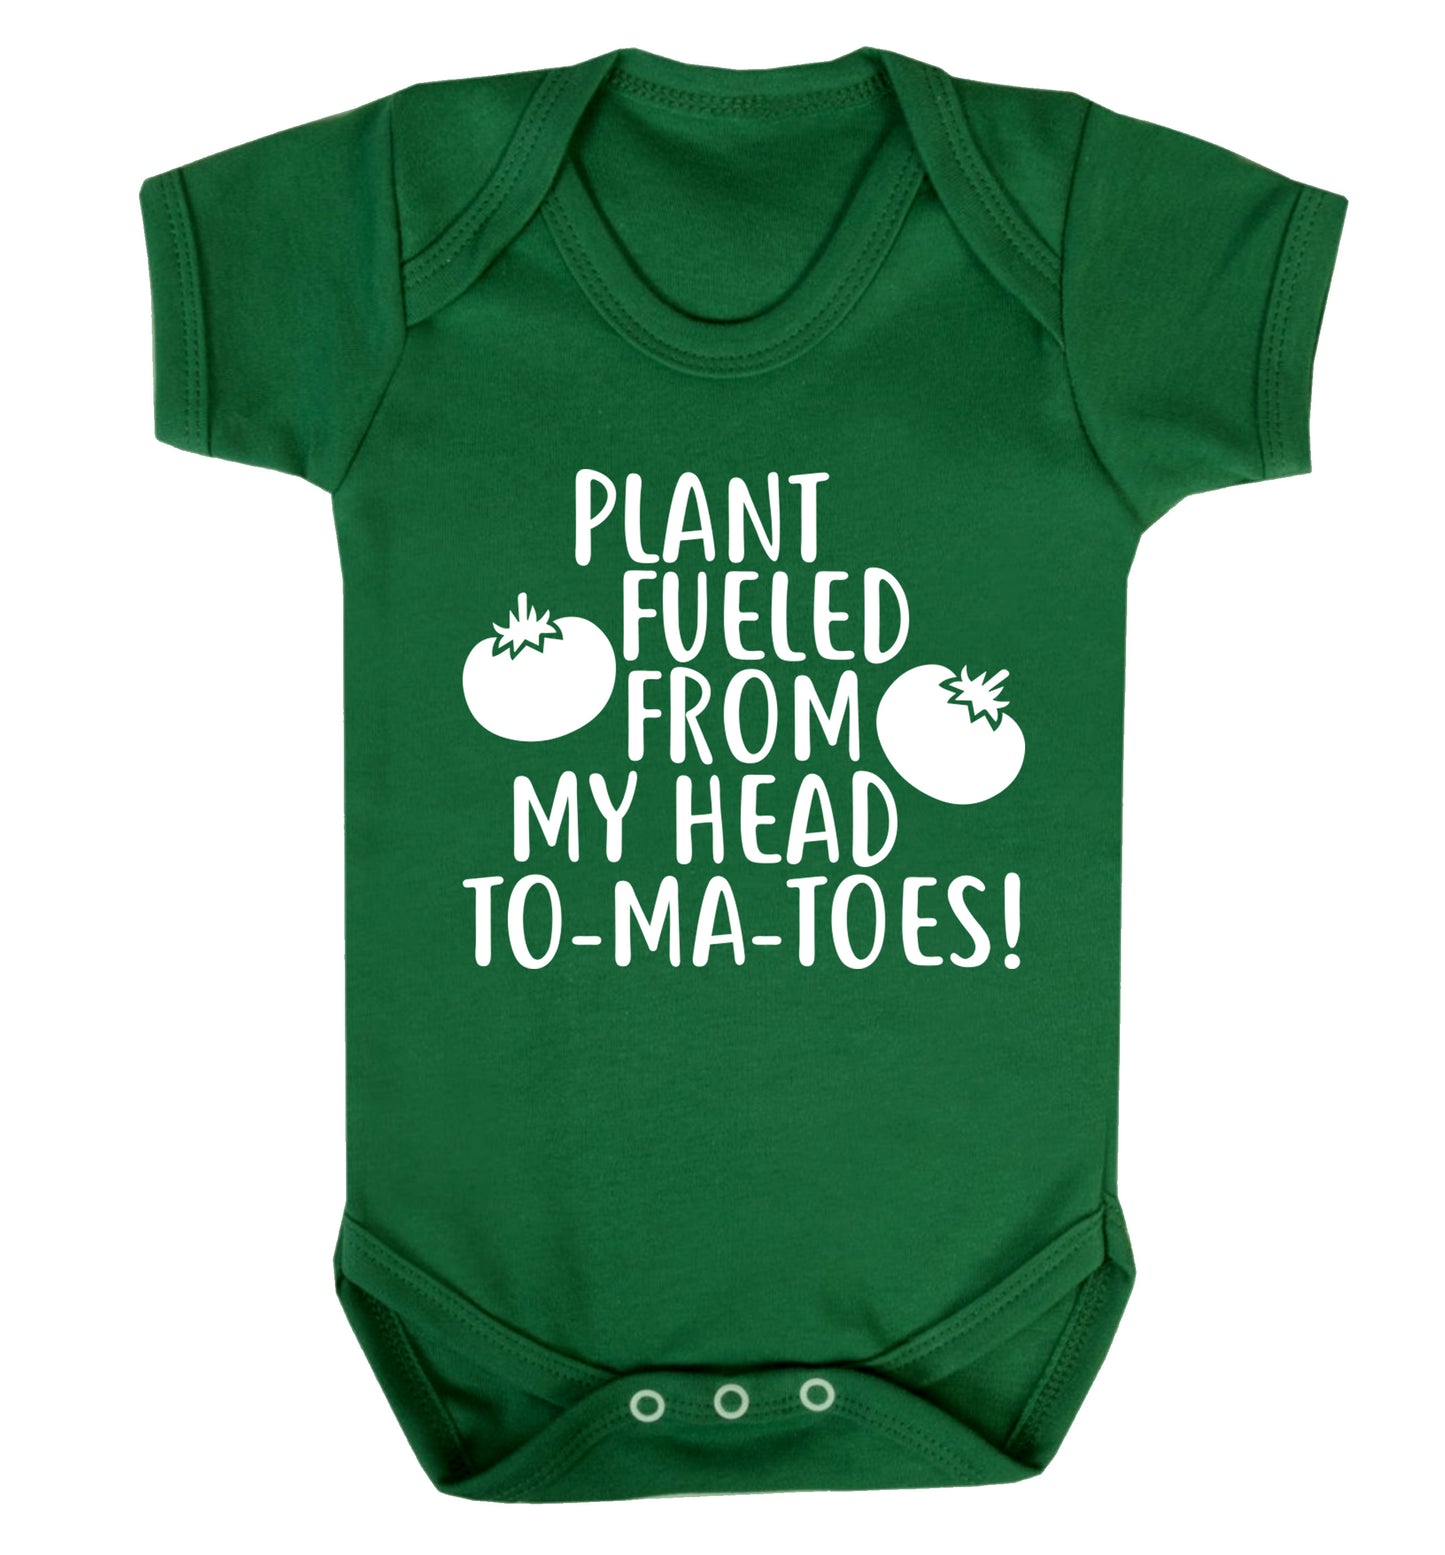 Plant fueled from my head to-ma-toes Baby Vest green 18-24 months